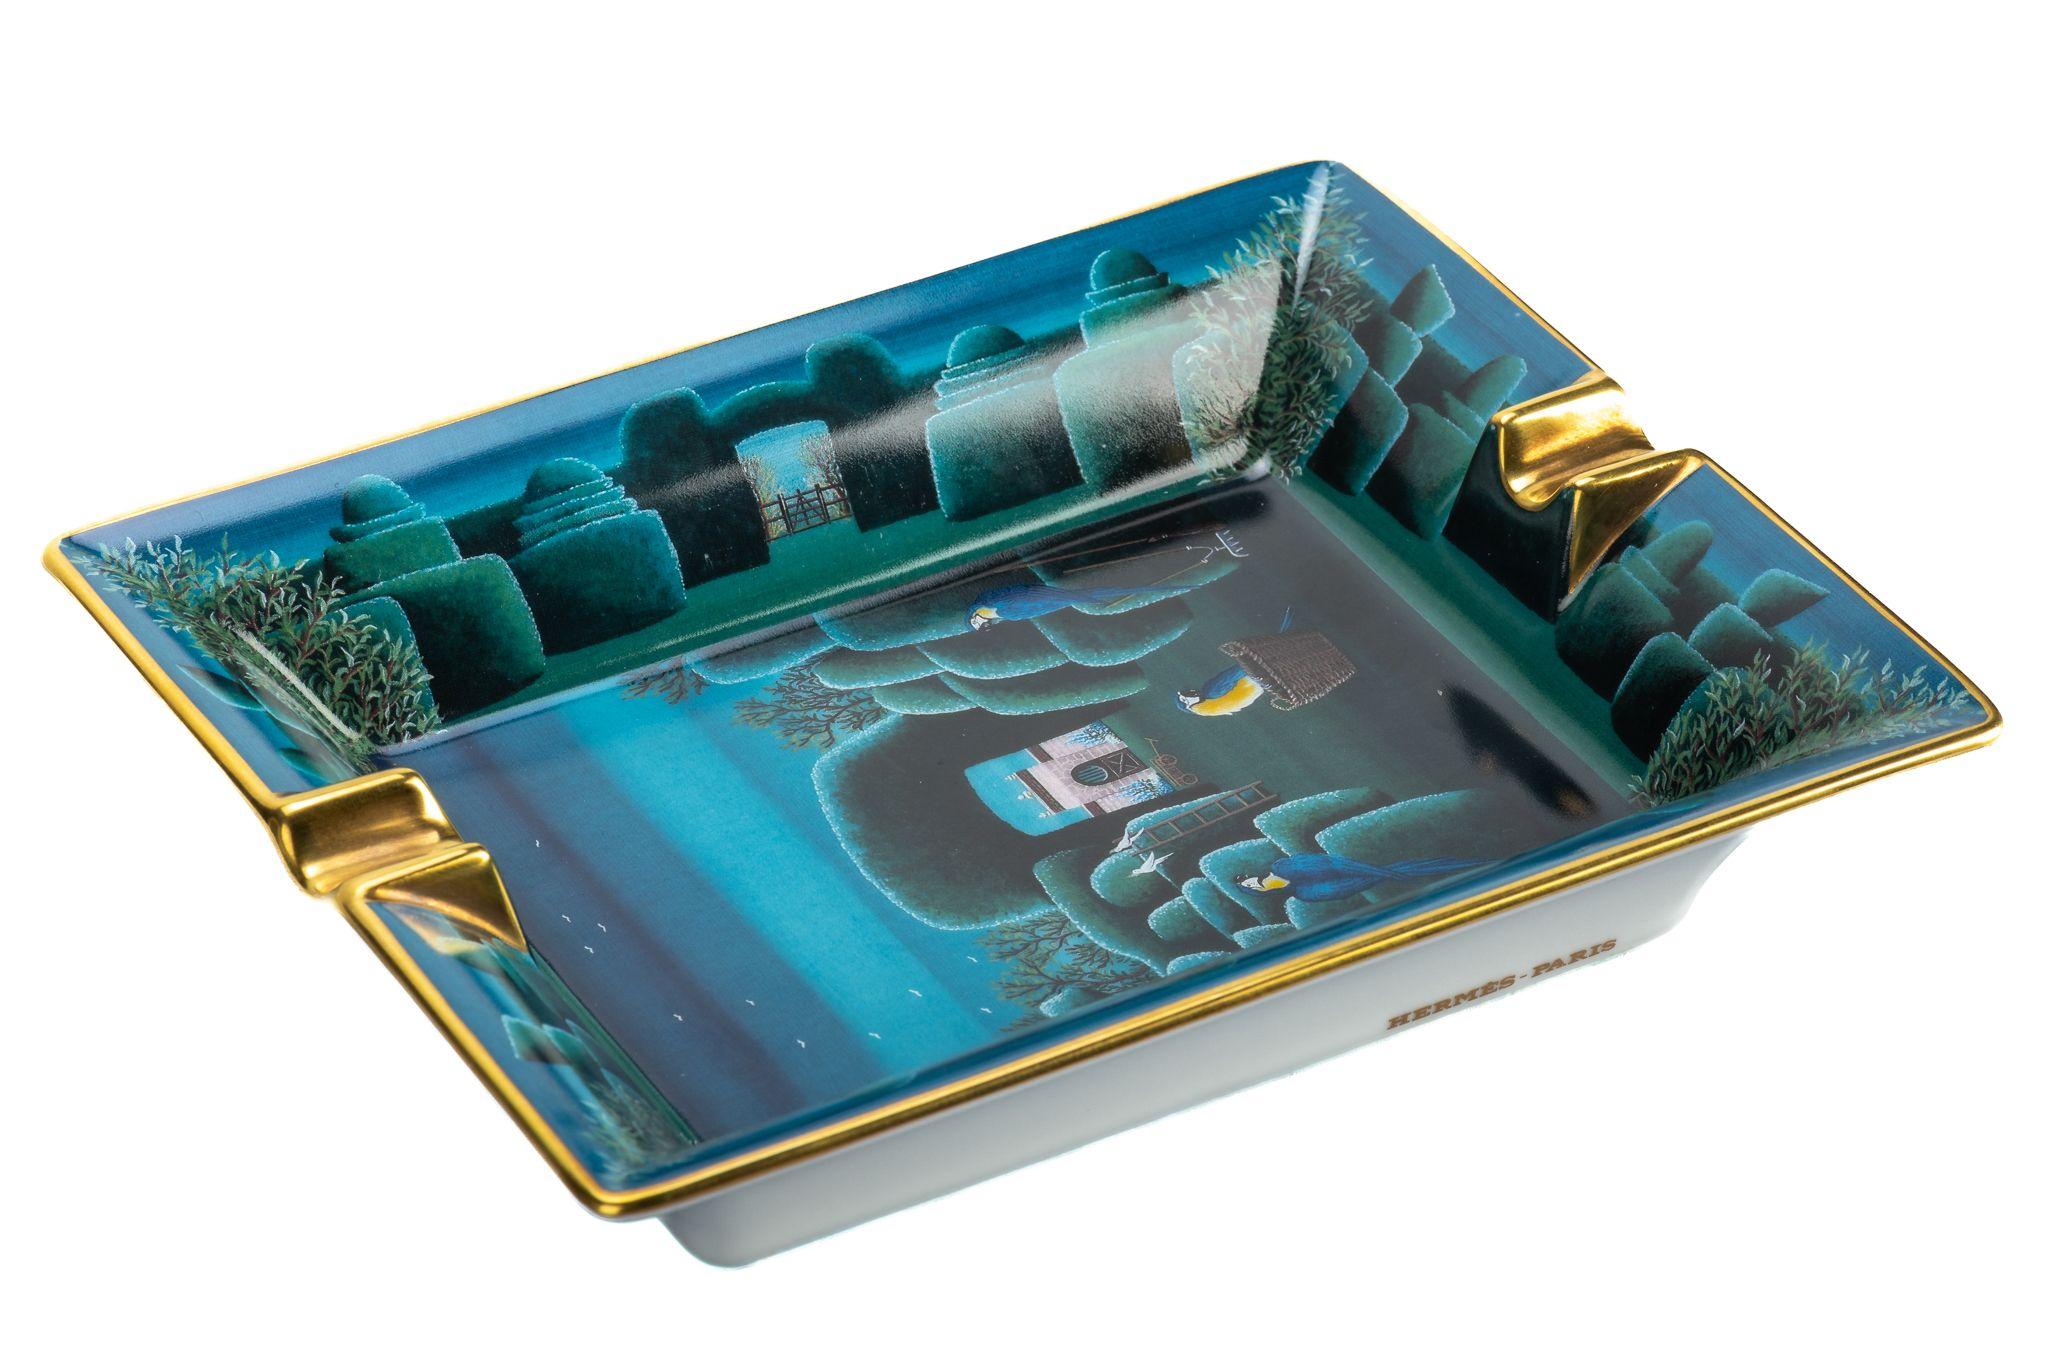 Hermes light blue, dark blue and green porcelain ashtray with parrots in the night design